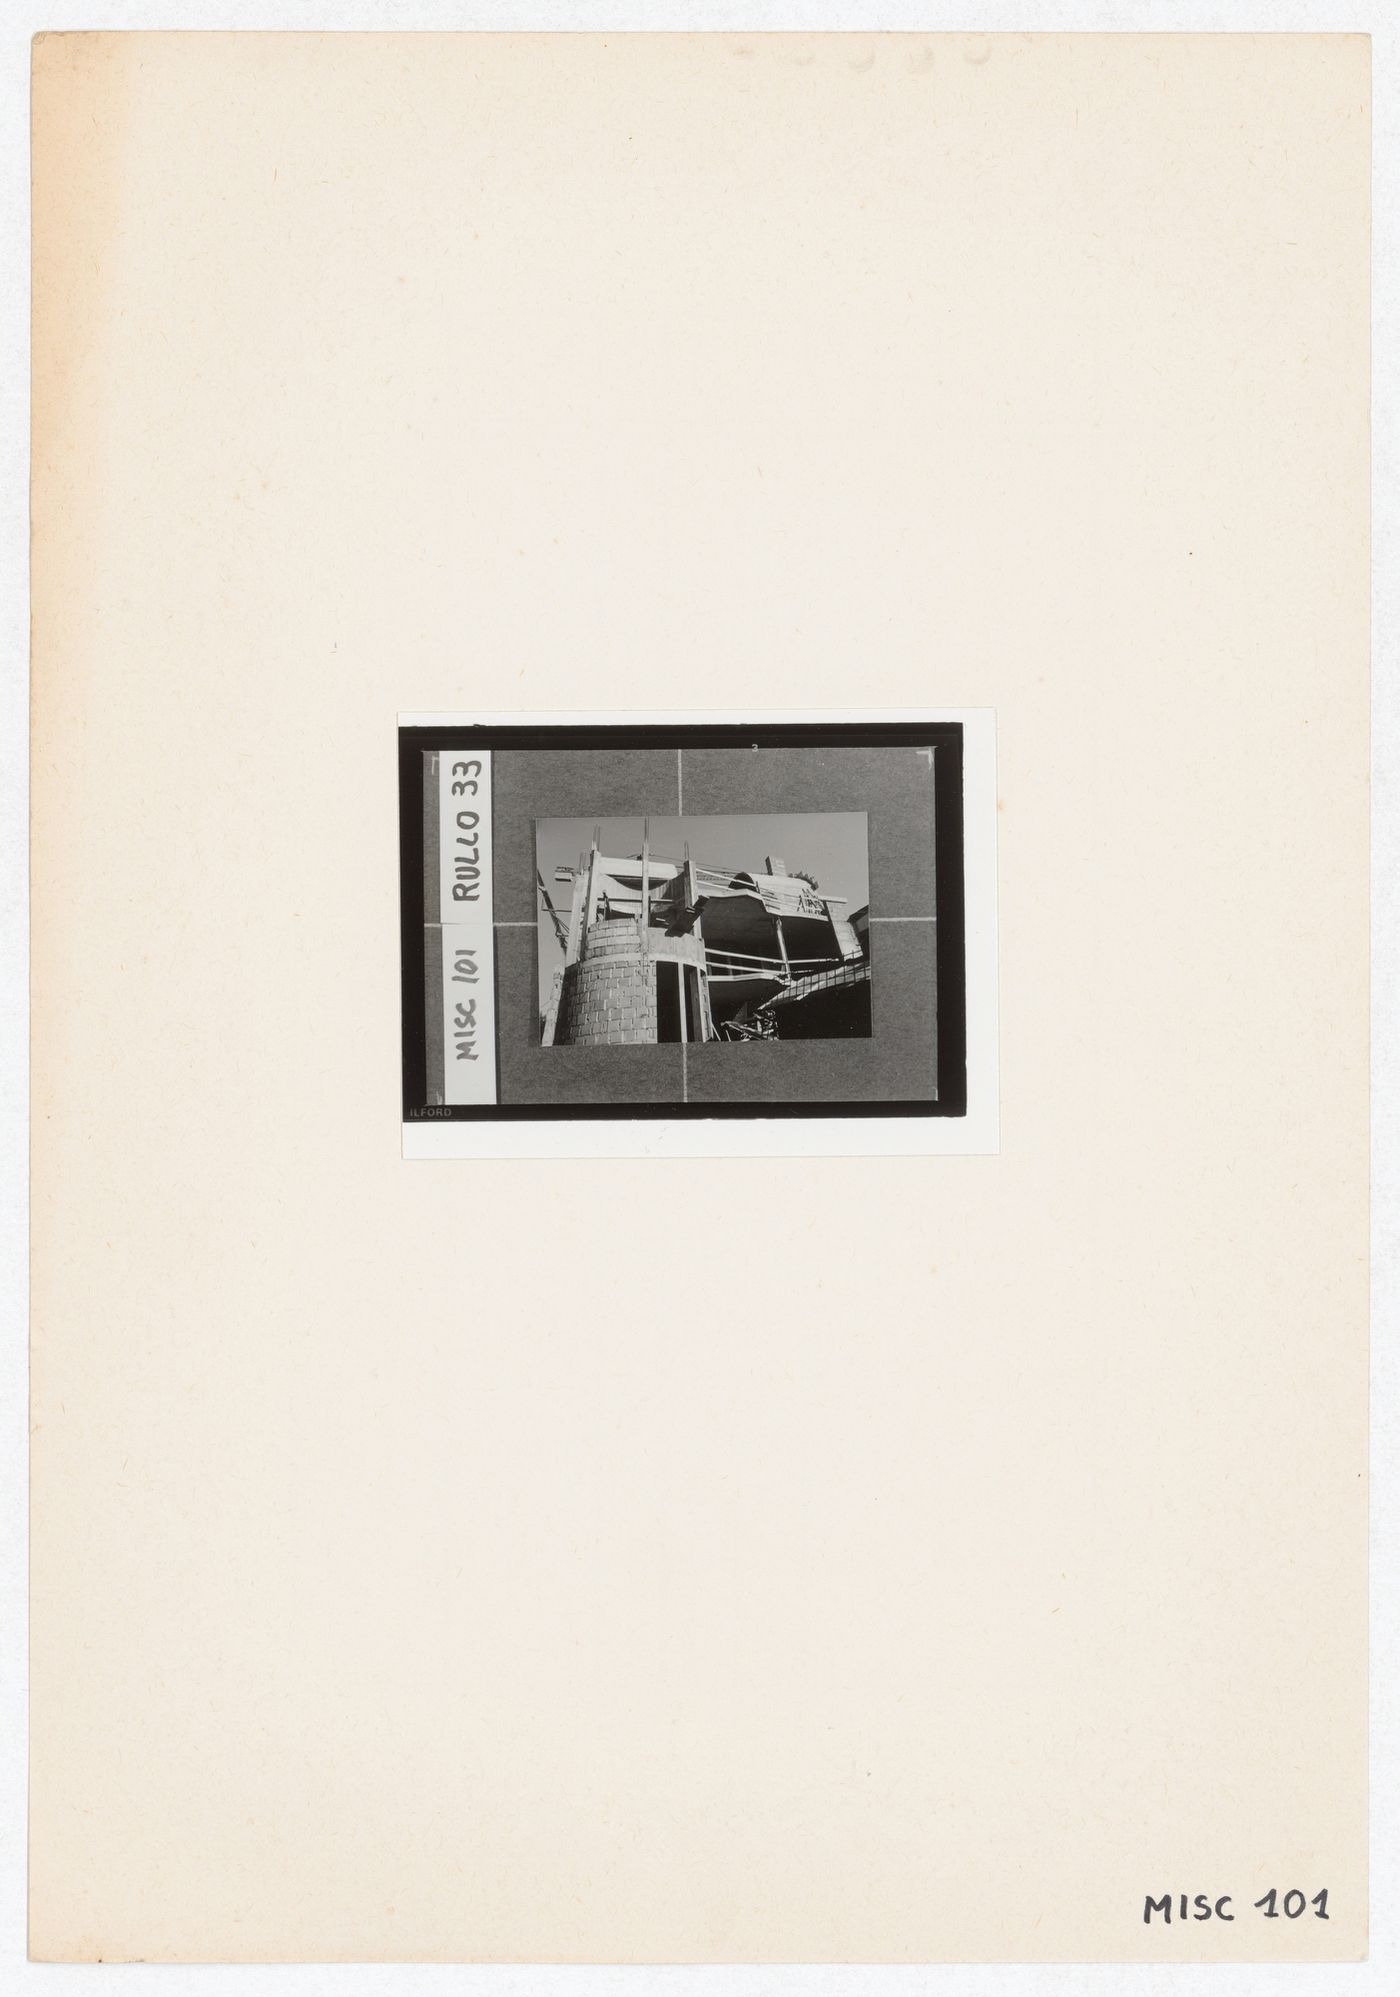 Photograph for the exhibition Hans Hollein. Opere 1960-1988